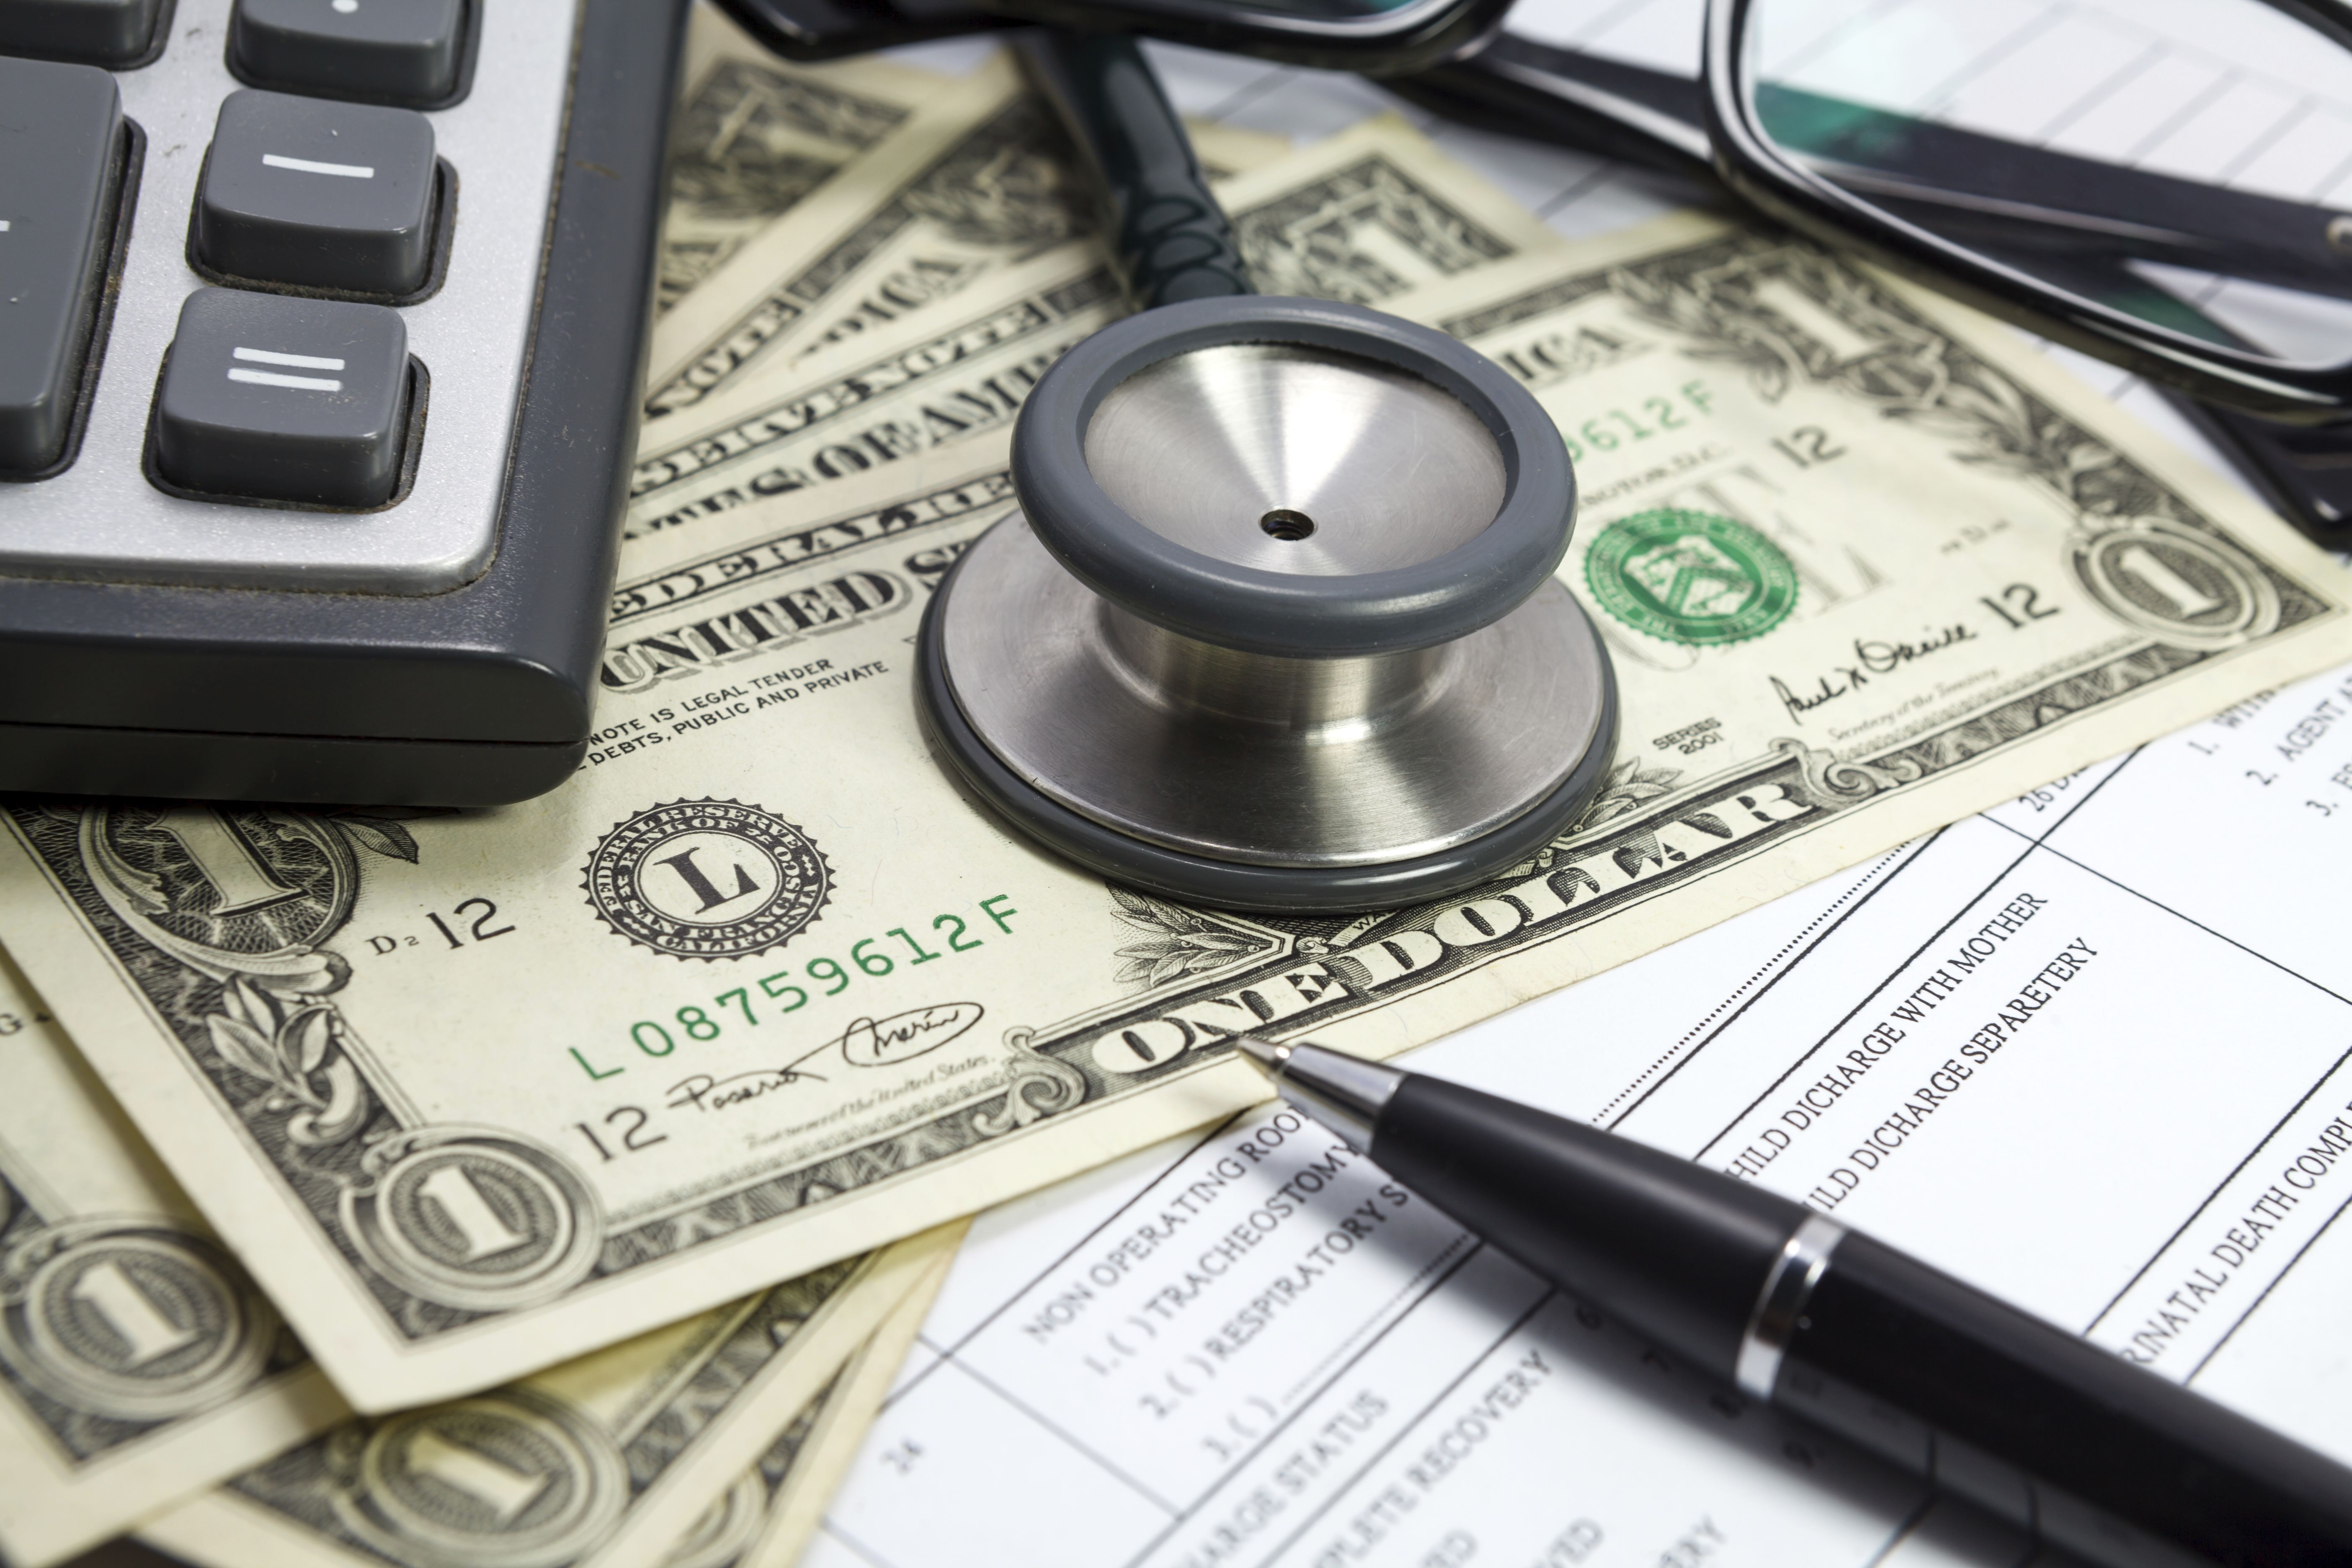 Employee health benefits' costs expected to rise 5% in 2020, new survey says